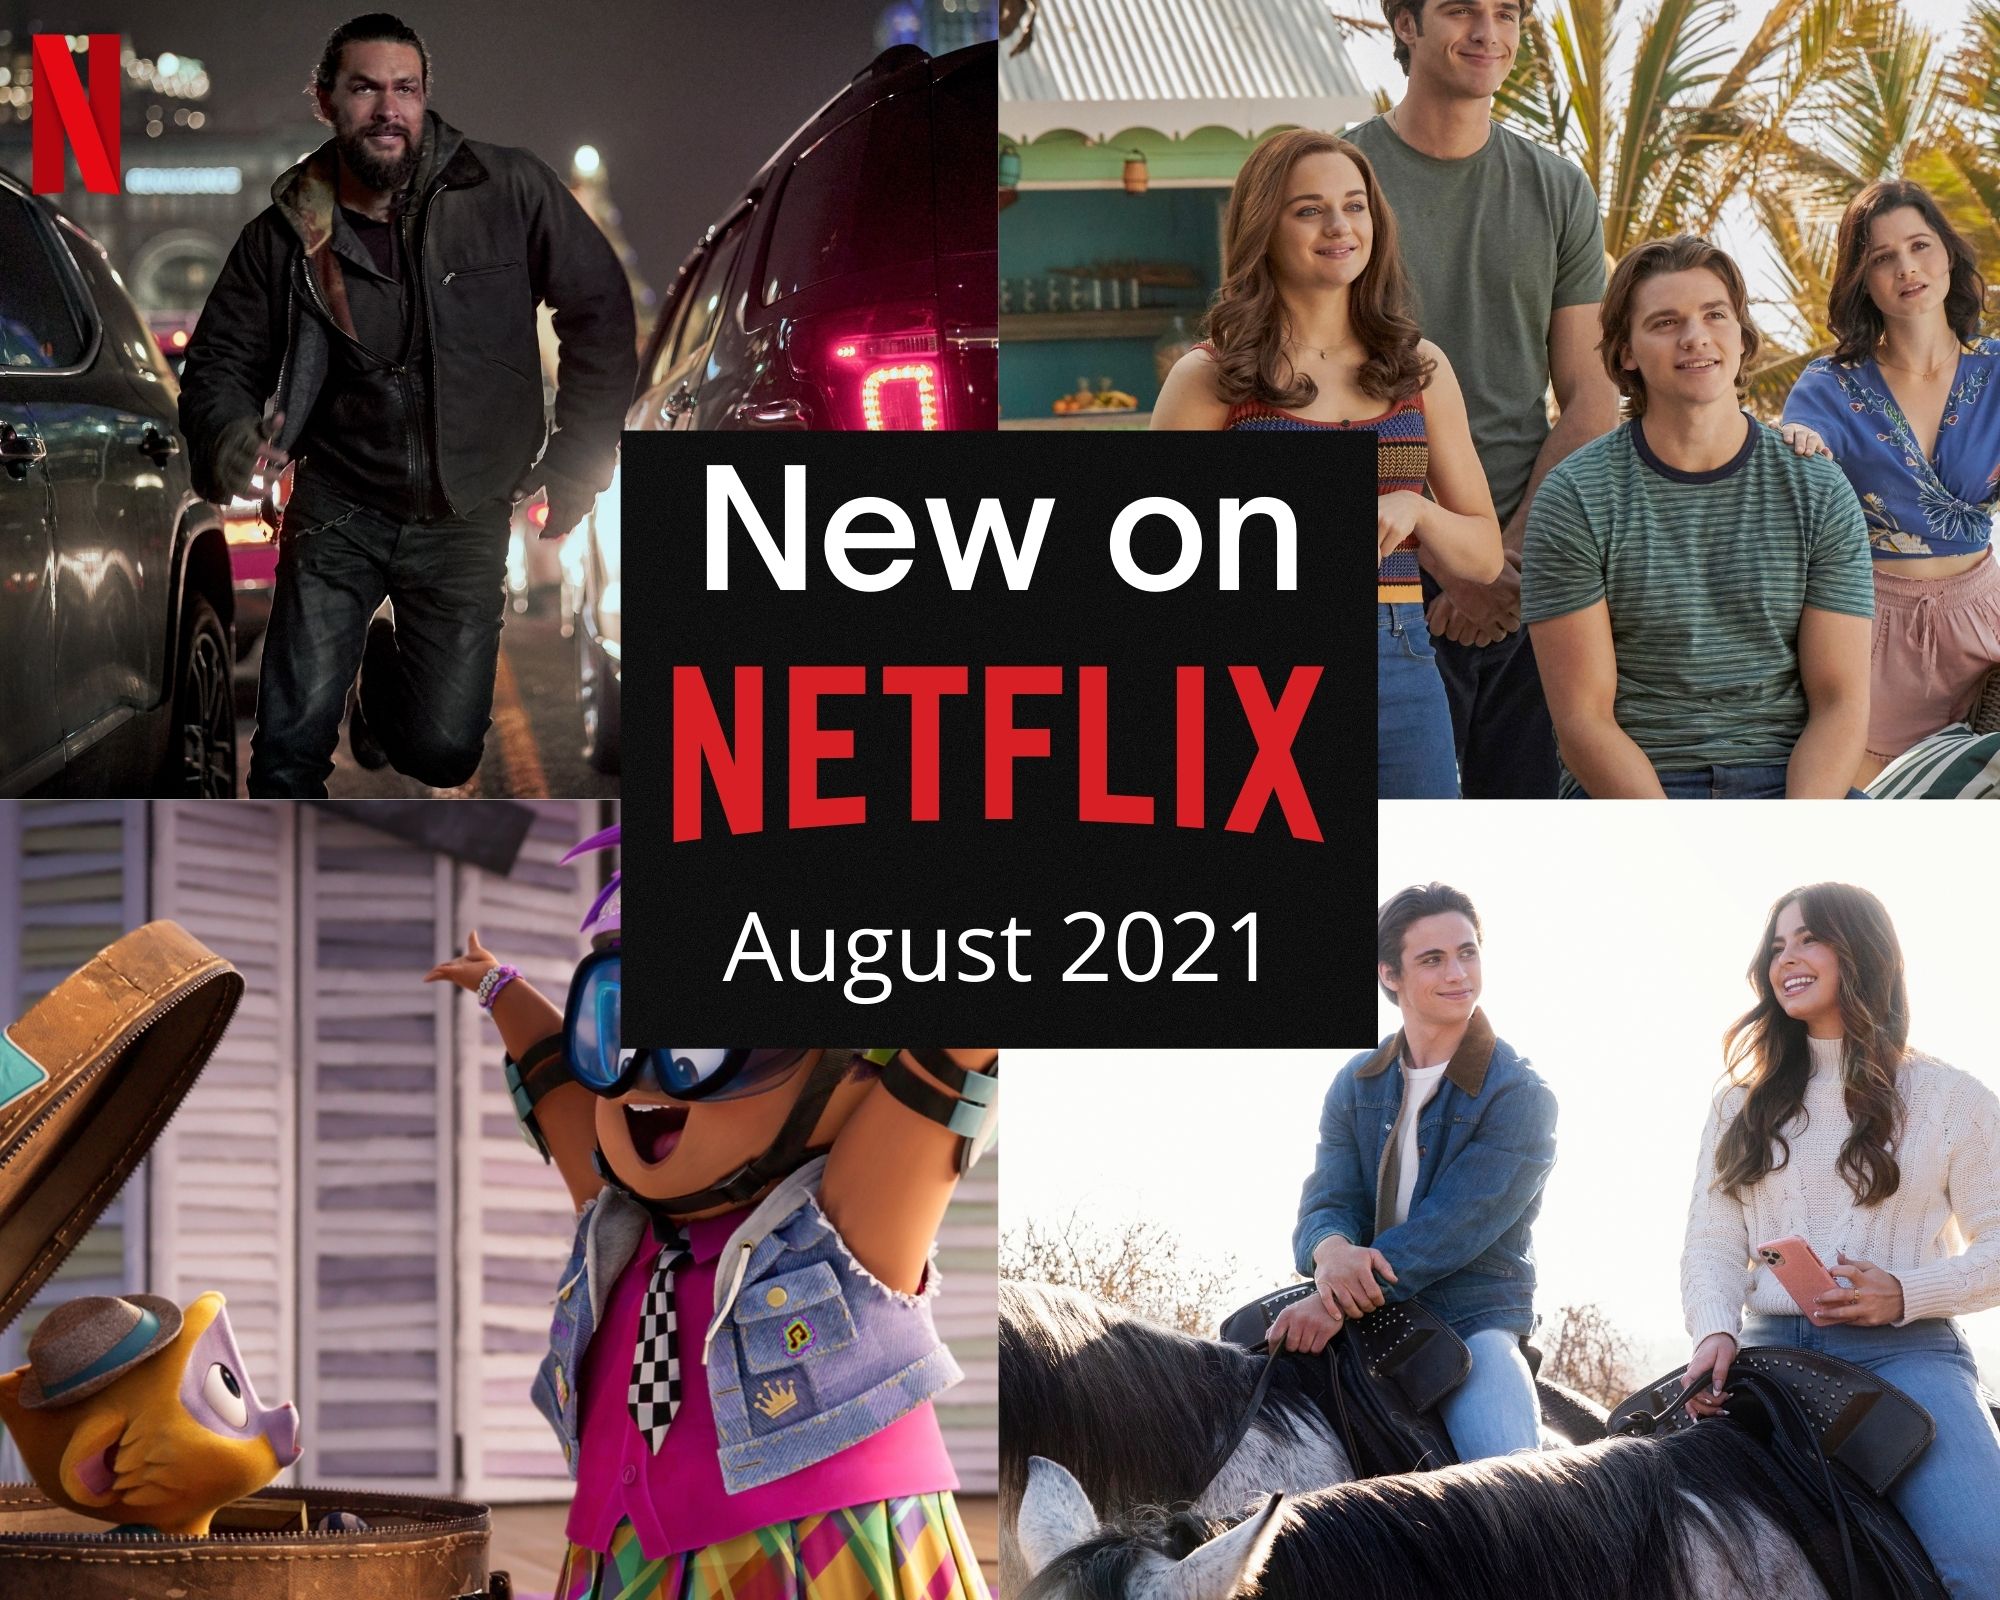 Check out what's coming to Netflix this August 2021